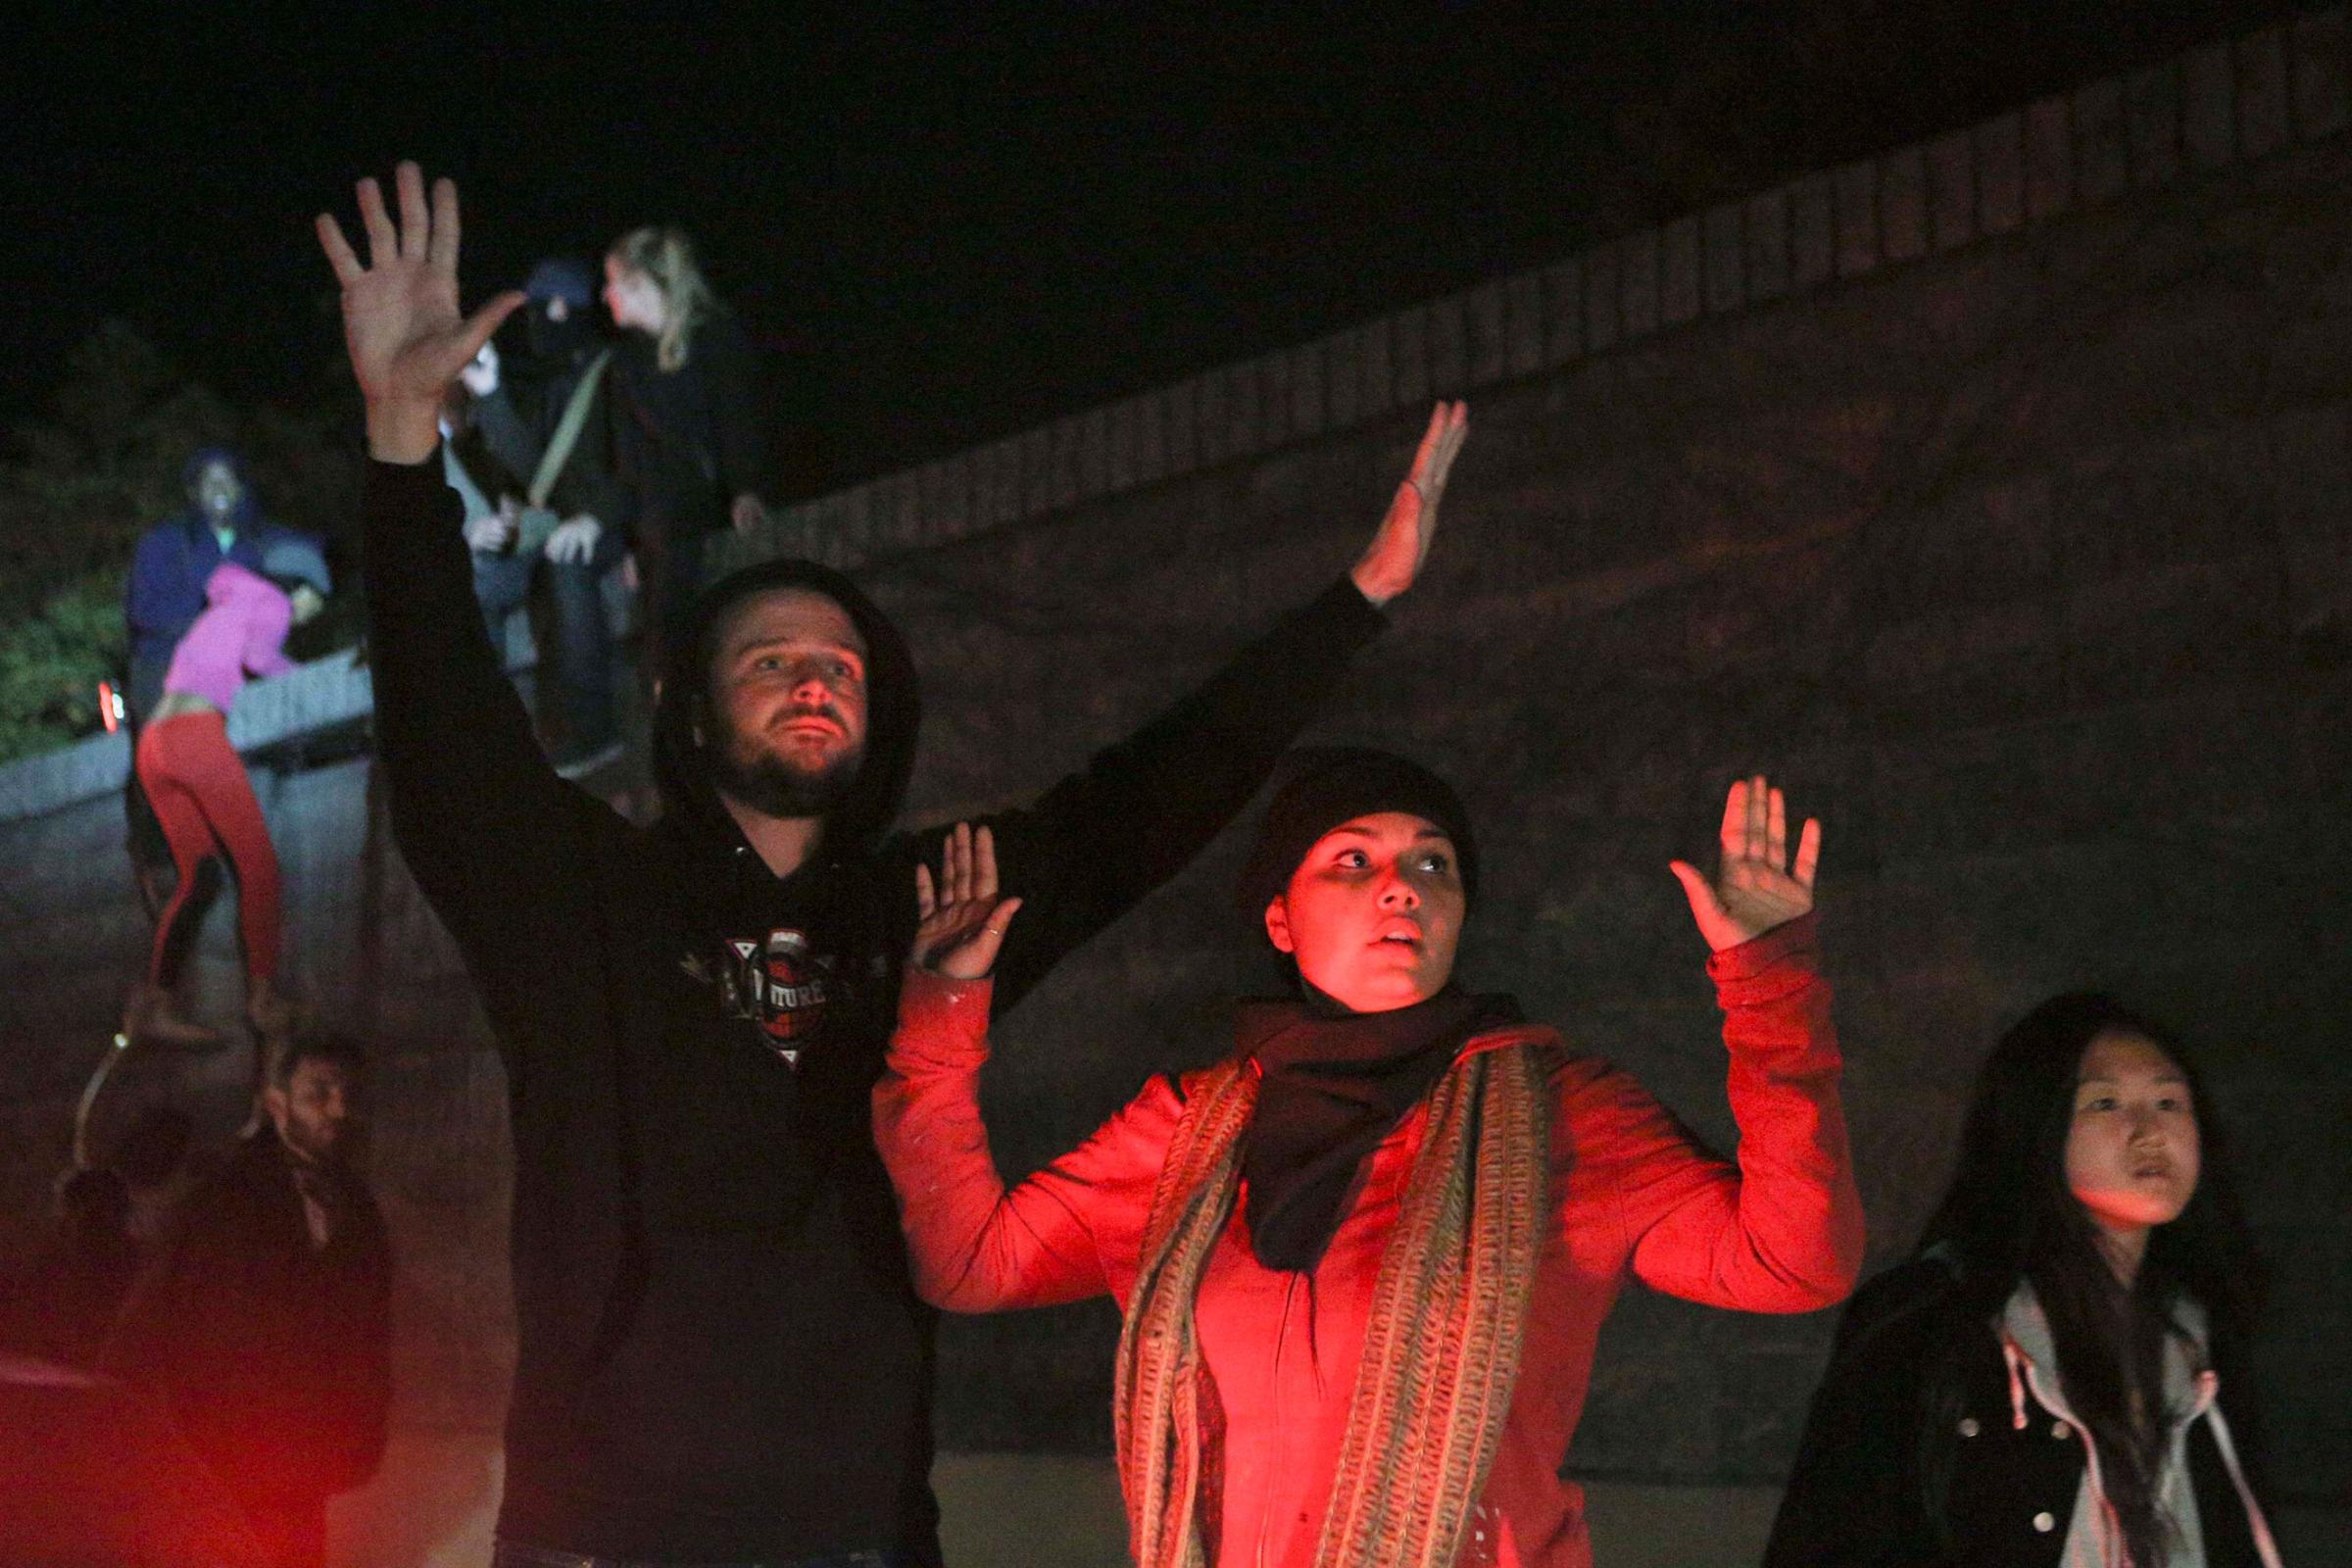 Protestors block the freeway during a demonstration in Oakland, Calif., on Nov. 24, 2014.